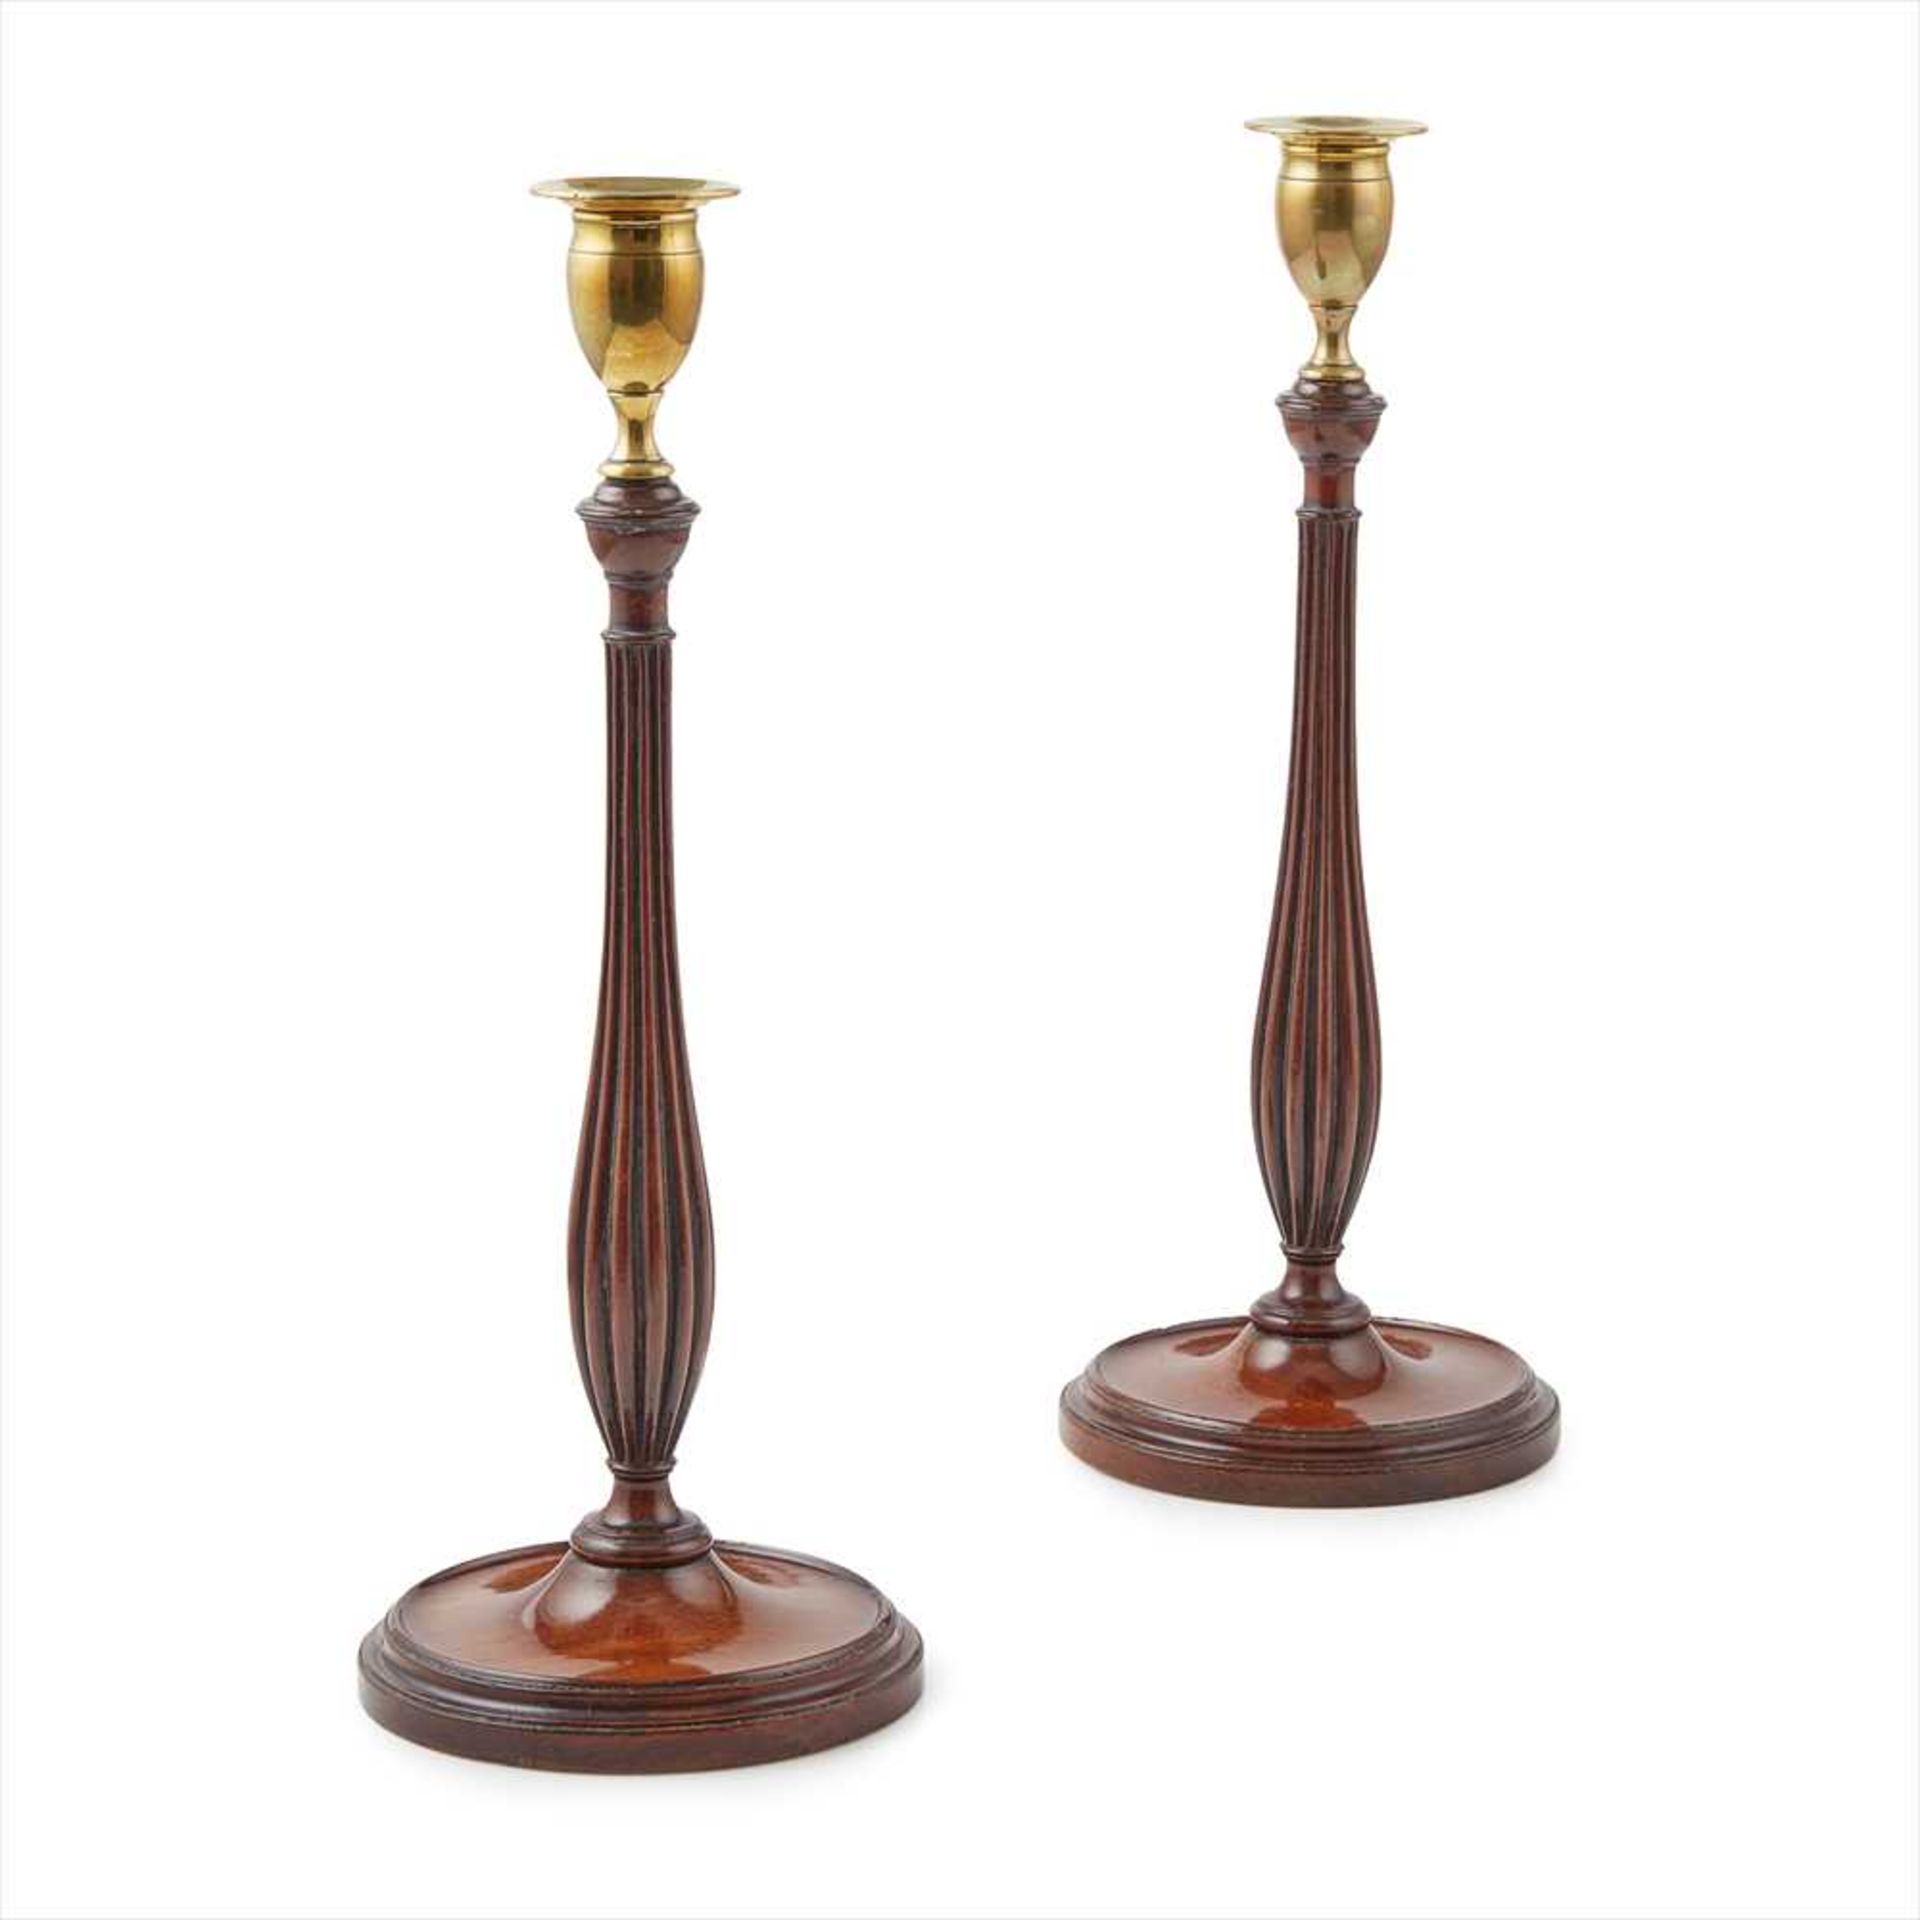 PAIR OF GEORGIAN MAHOGANY AND BRASS CANDLESTICKS LATE 18TH/ EARLY 19TH CENTURY